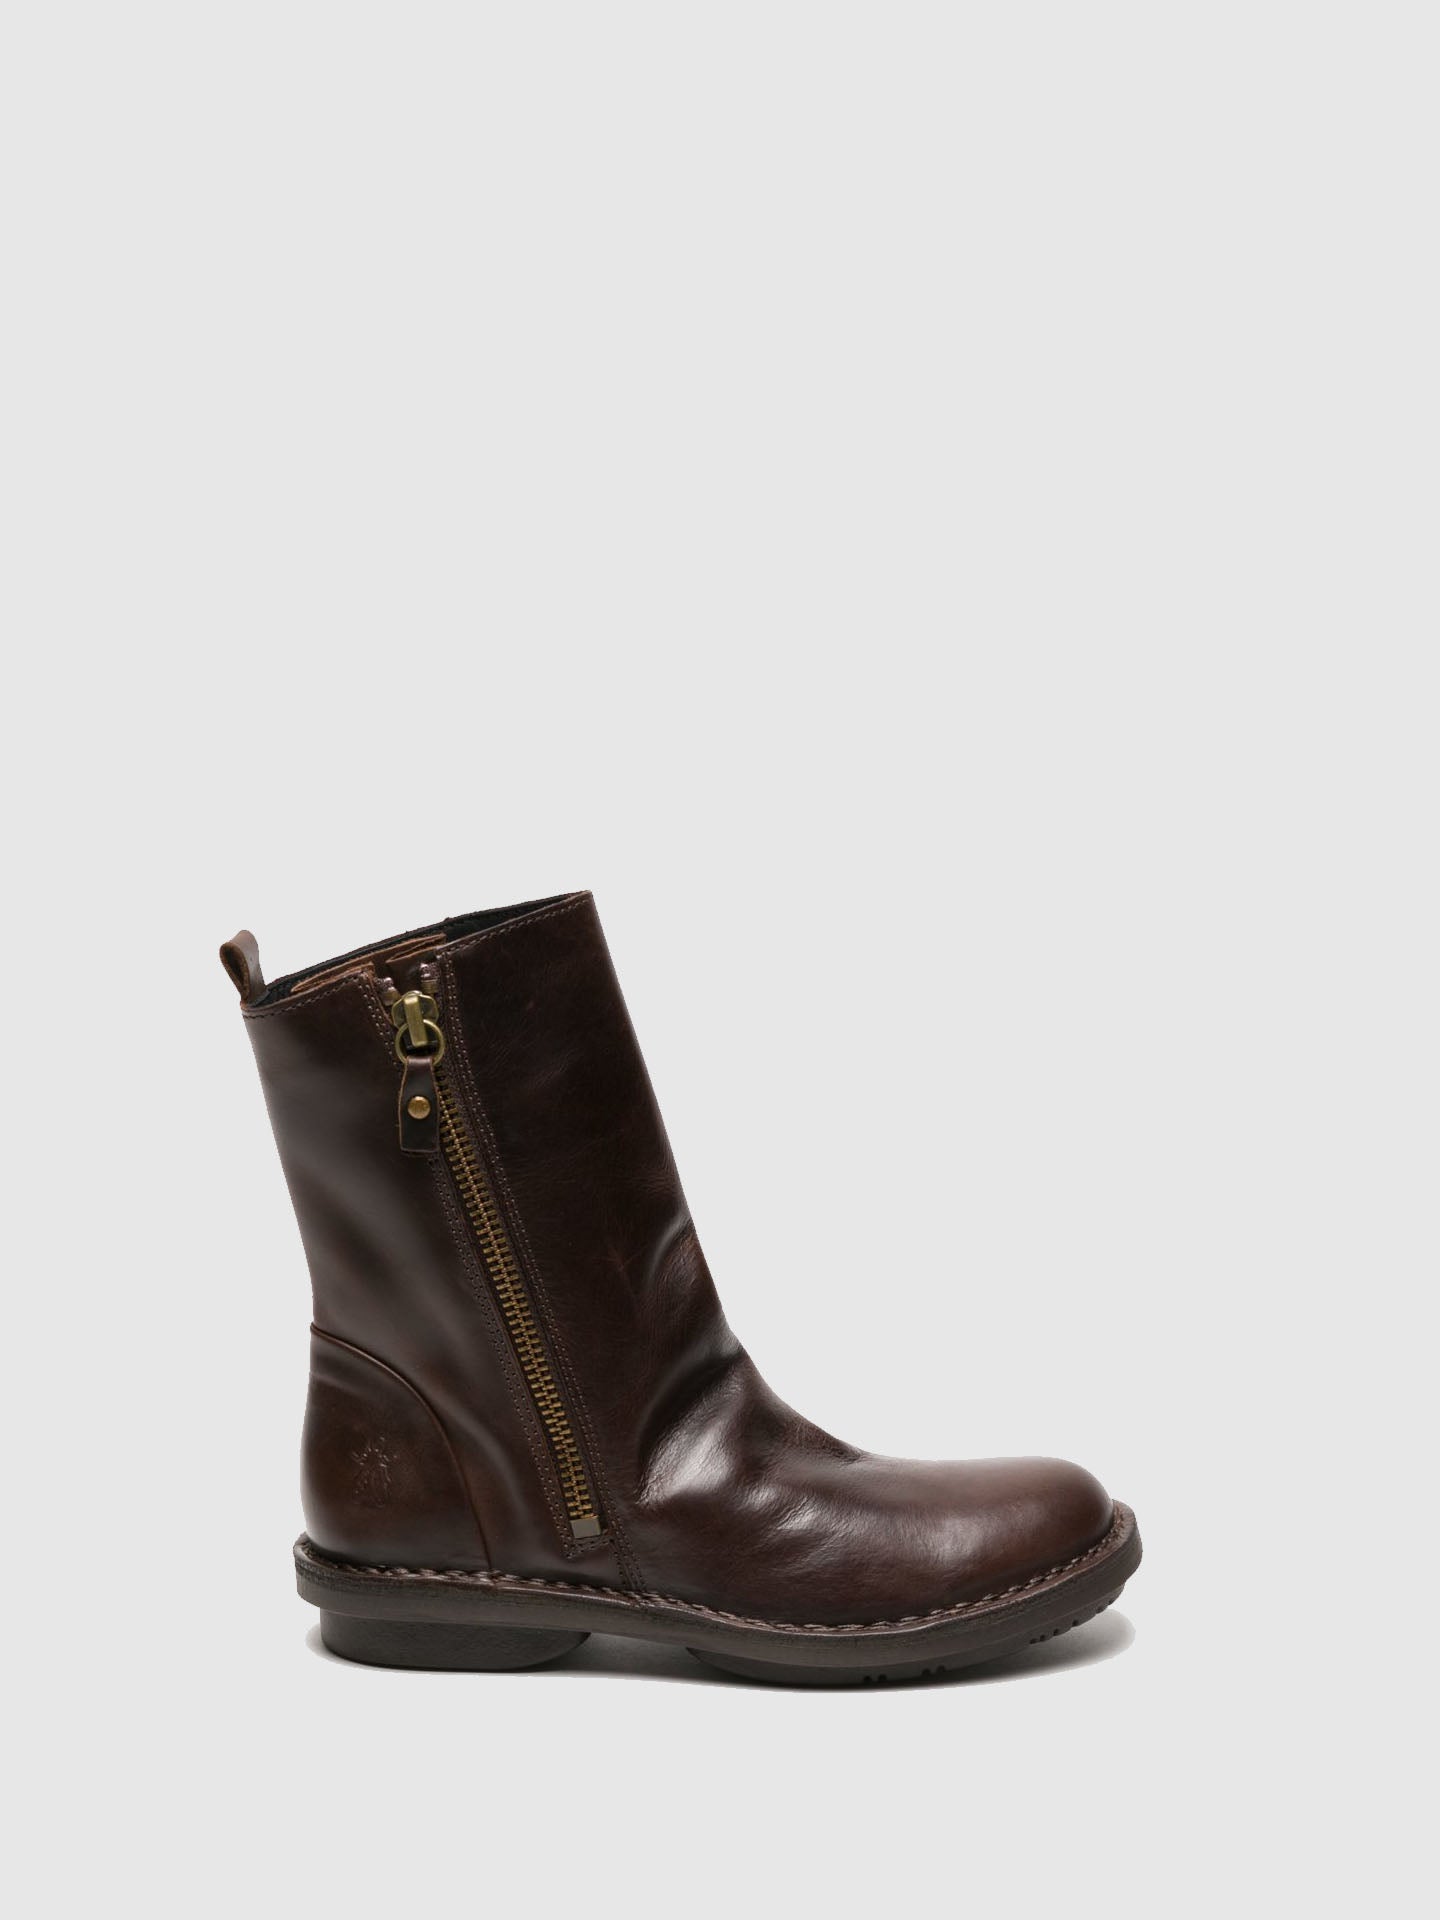 Fly London SaddleBrown Zip Up Ankle Boots